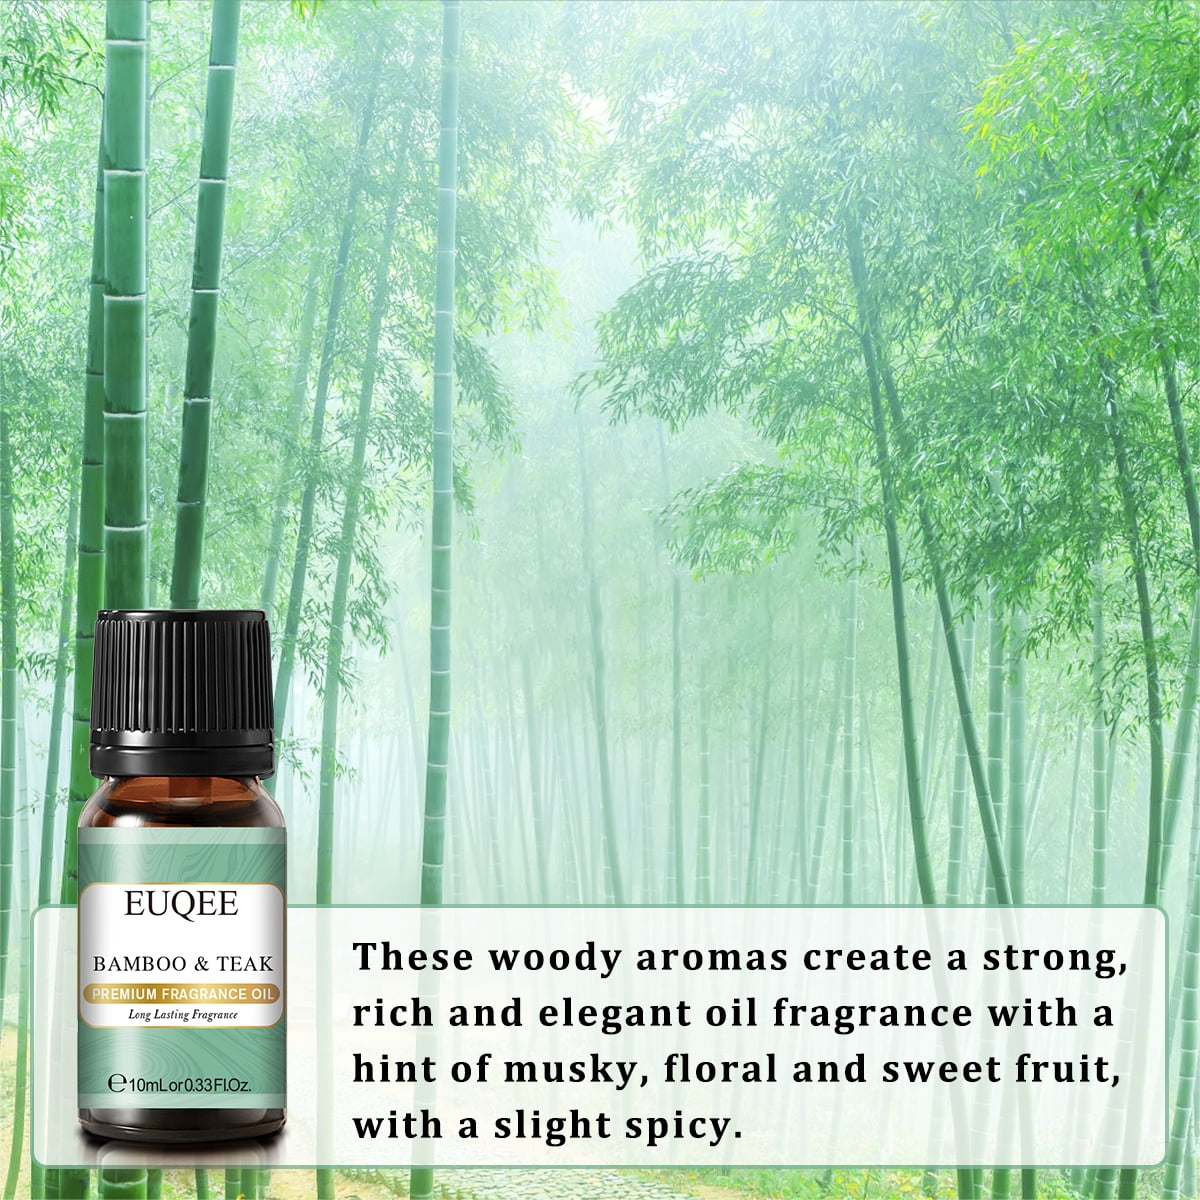 EUQEE Fragrance Oils Gift Set Premium Woody Scented Oil - Forest Pine, Warm Rustic Woods, Bamboo & Teak, Cedarwood, Leather, Swe